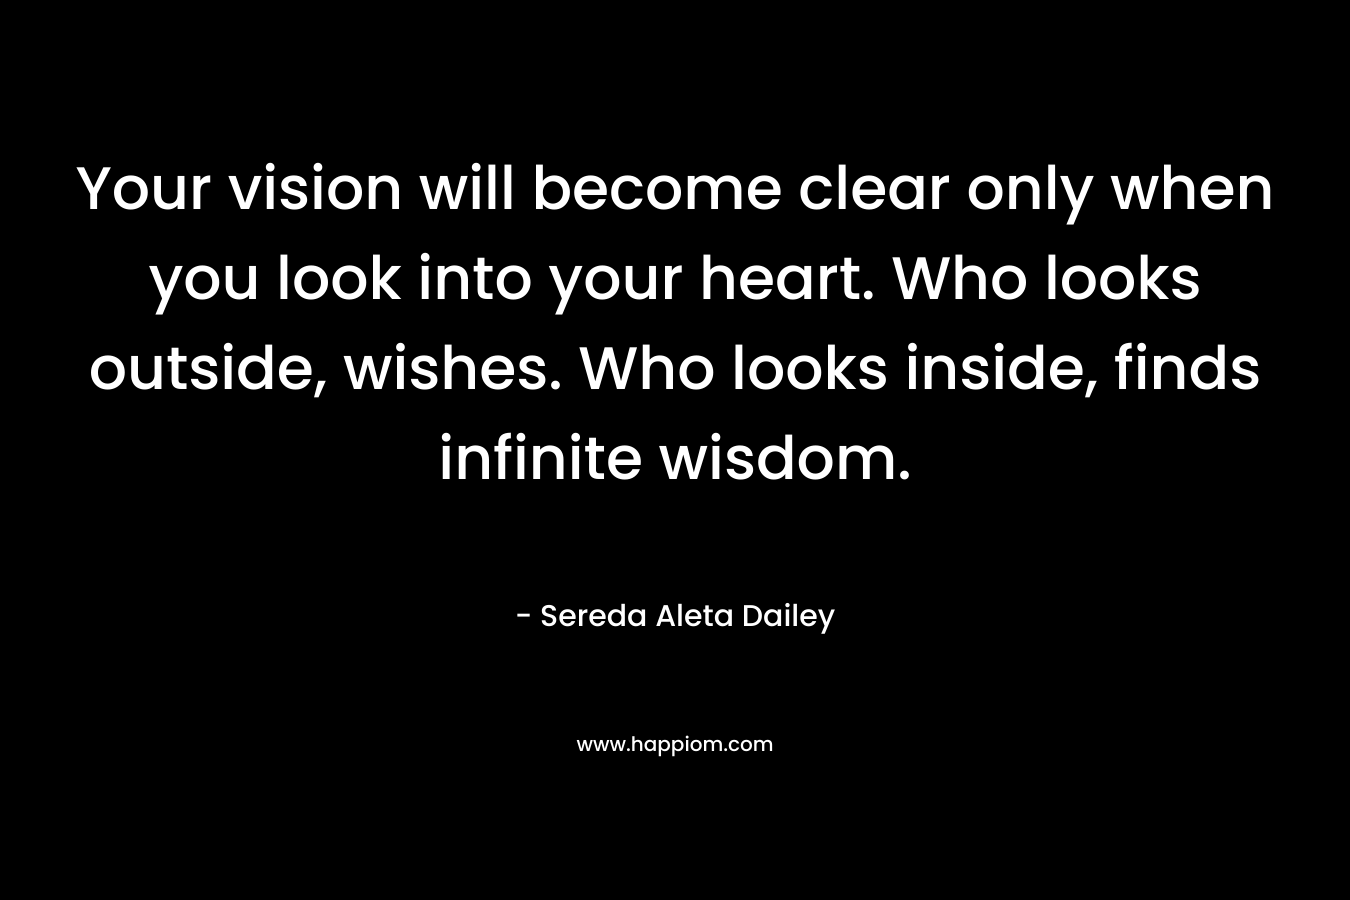 Your vision will become clear only when you look into your heart. Who looks outside, wishes. Who looks inside, finds infinite wisdom.